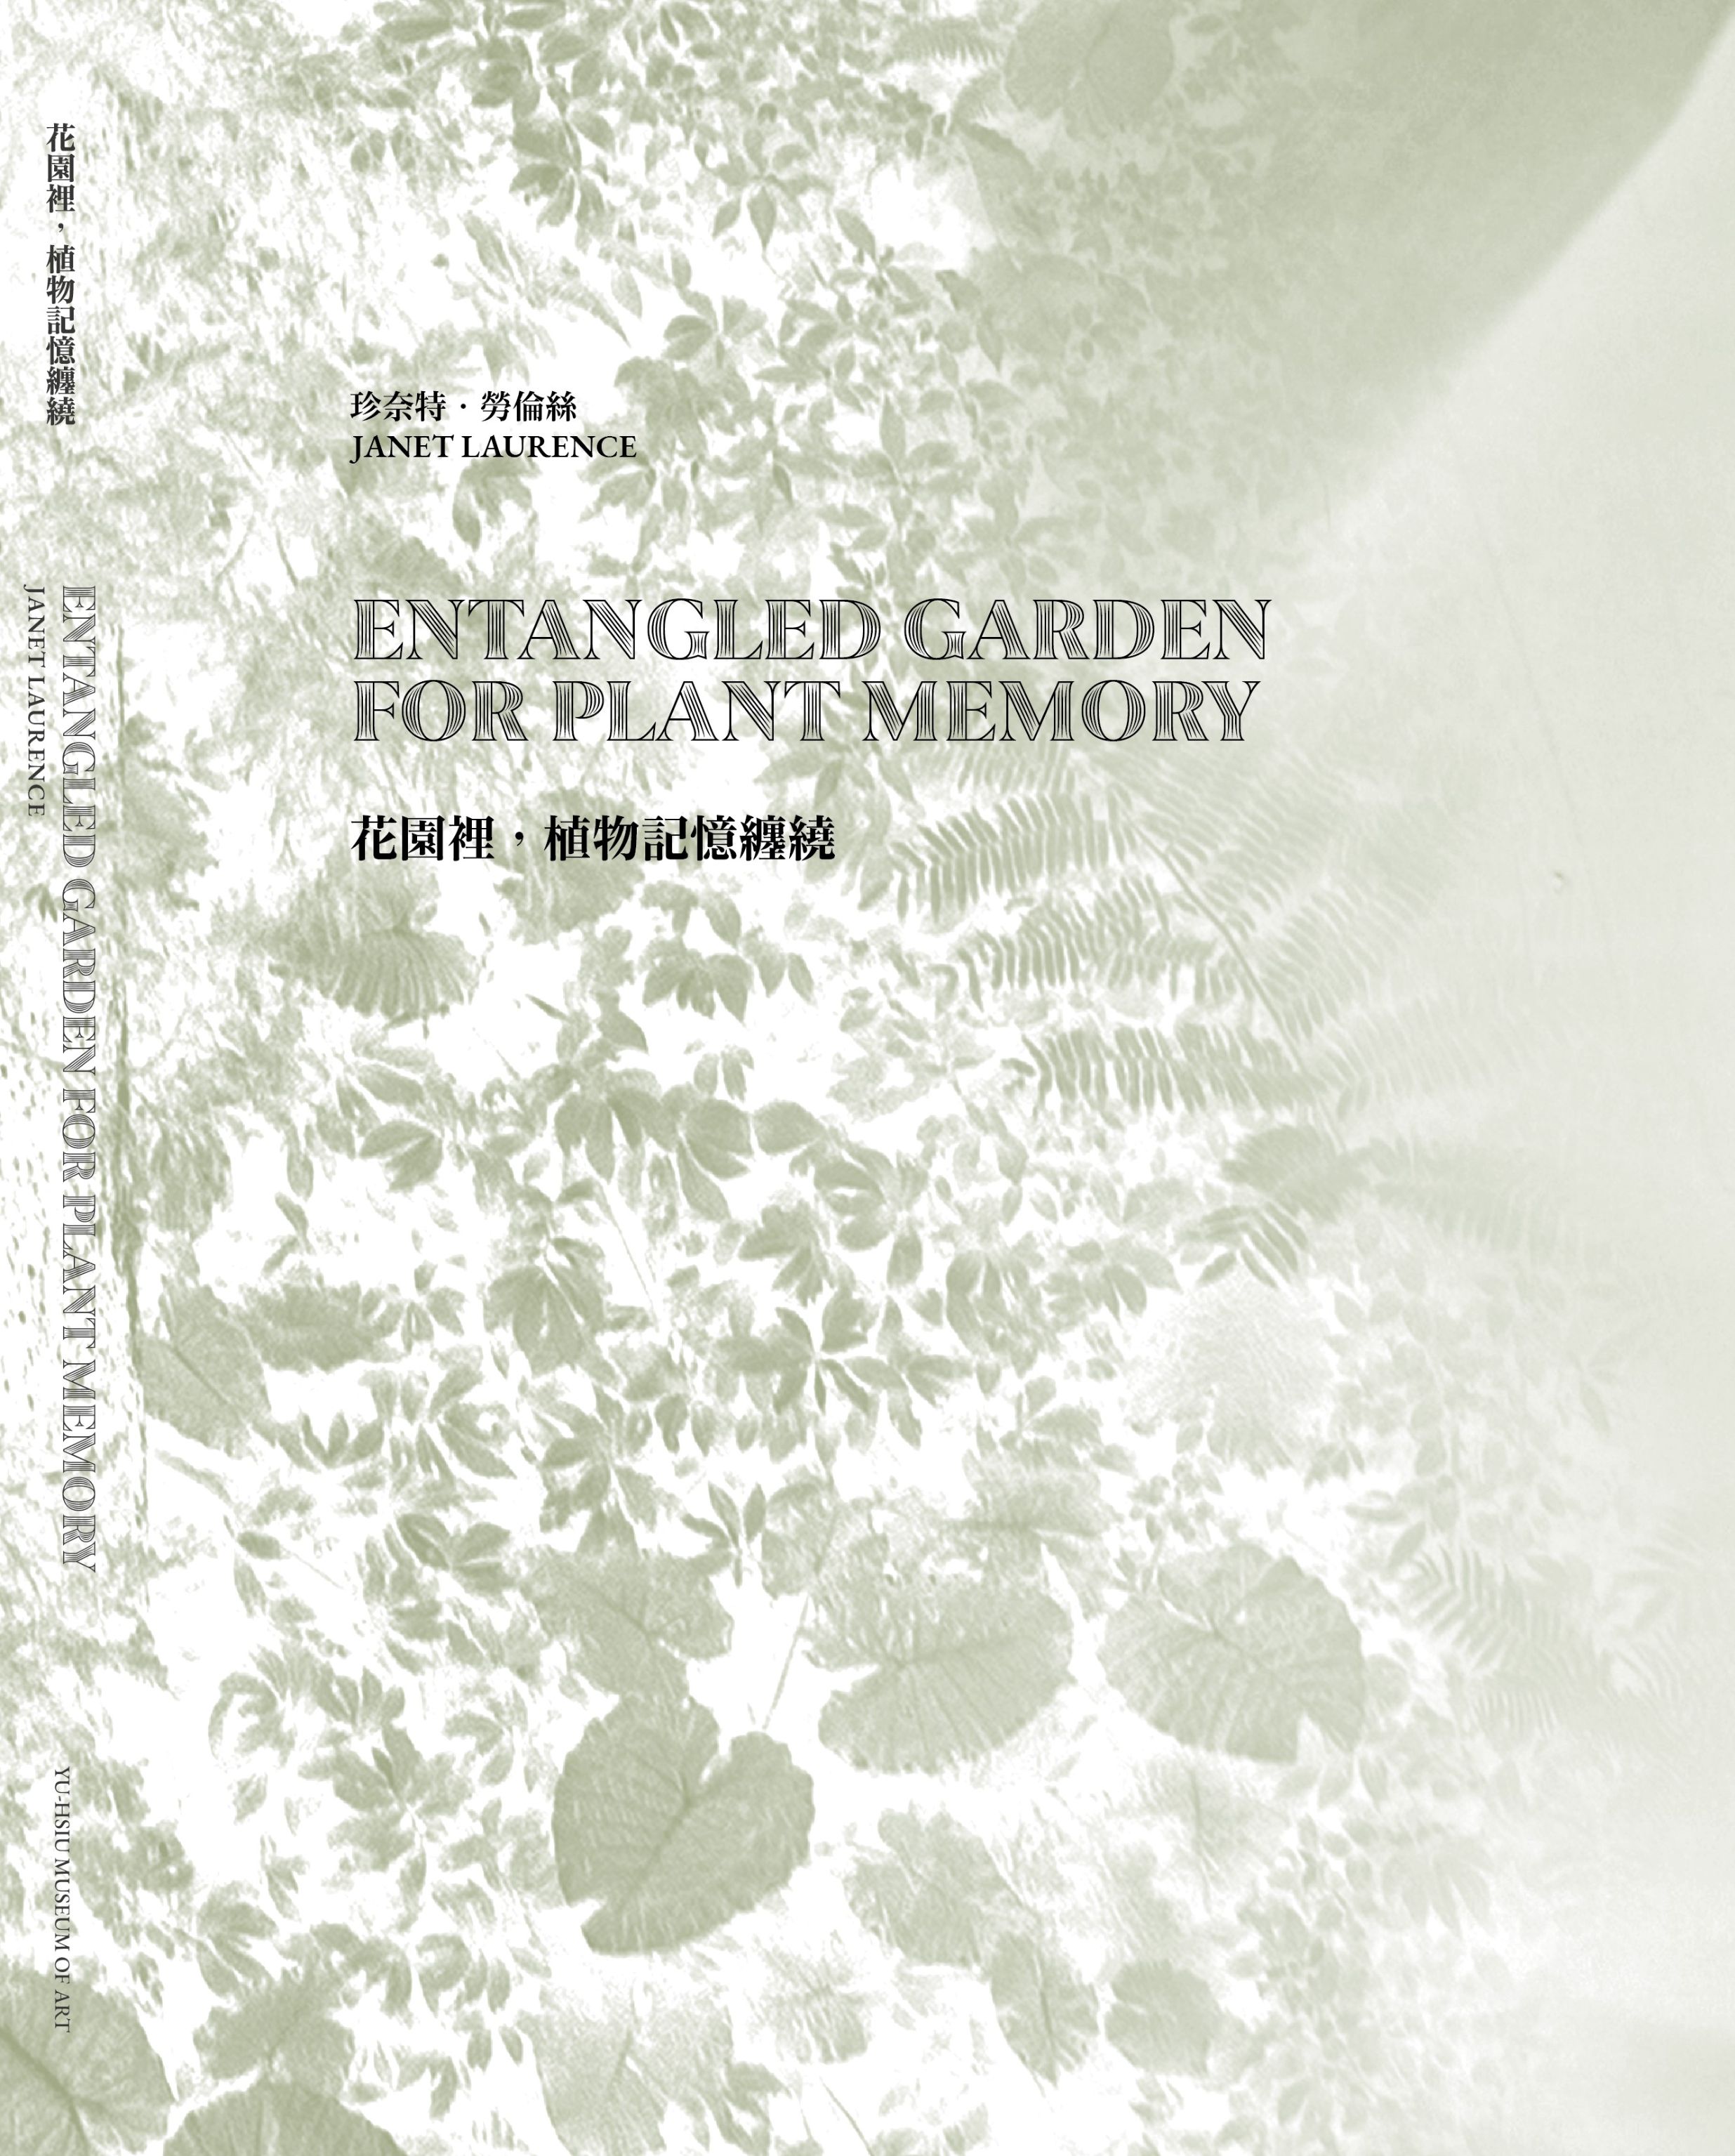 Entangled Garden for Plant Memory – A Solo-Exhibition of Janet Laurence